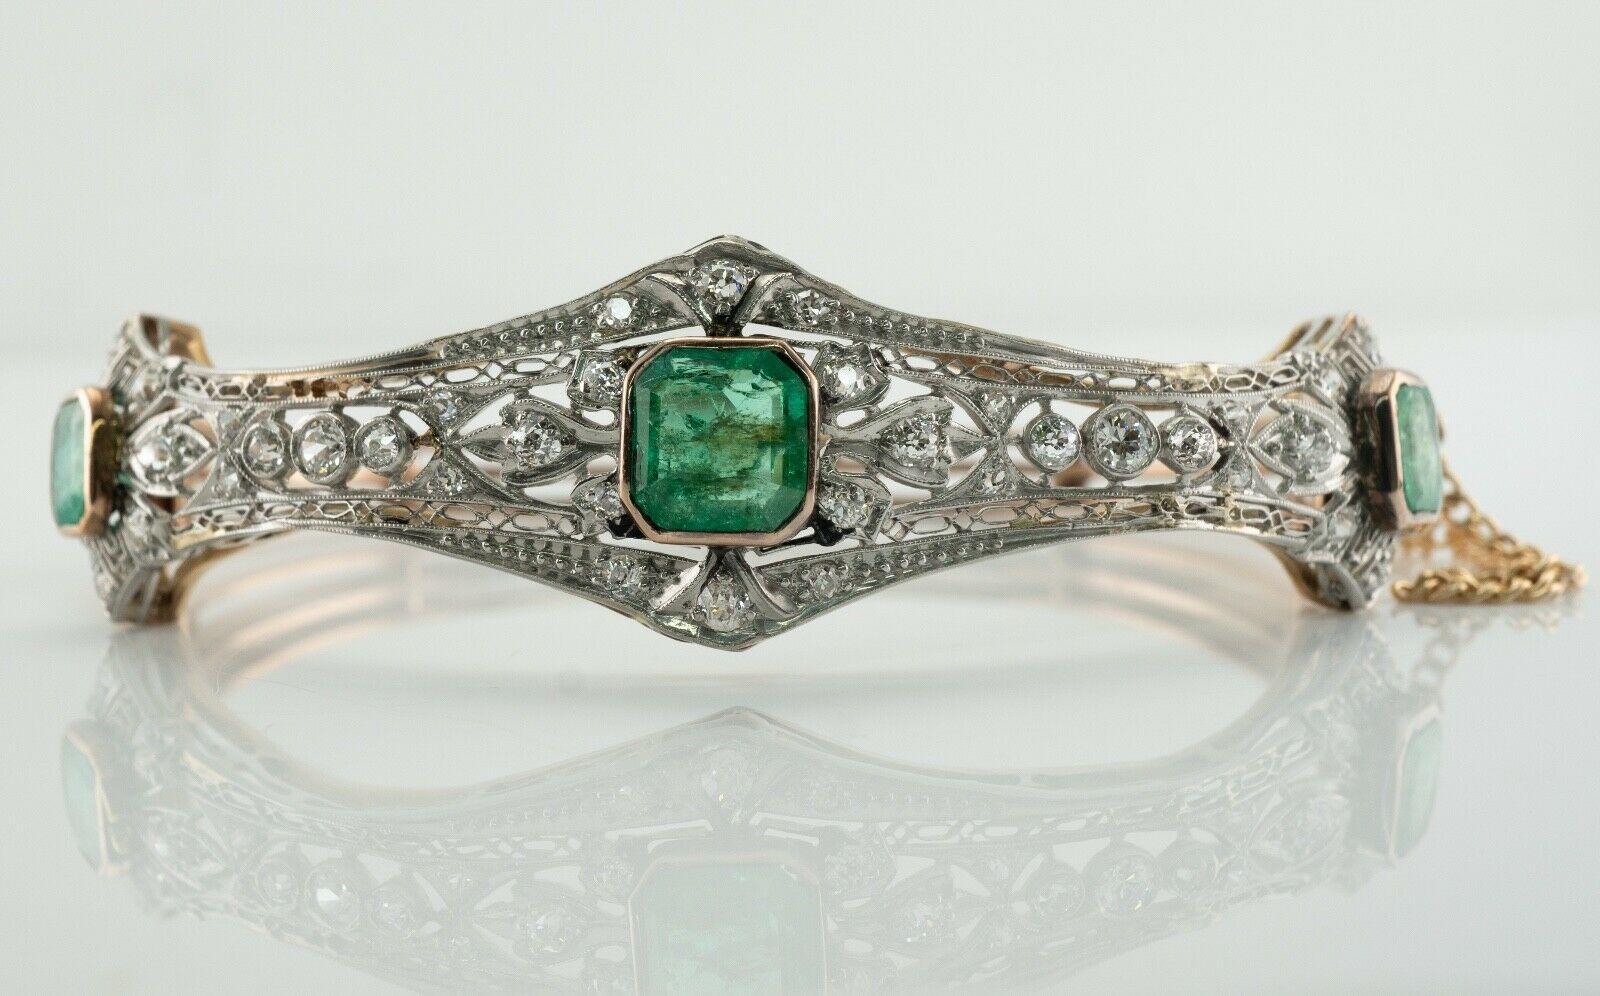 This antique bracelet is crafted in solid 14K Yellow Gold with a hint of Rose gold and White gold for the top (carefully tested and guaranteed).
Three natural Earth mined Emeralds measure 8x7.5mm for the center and 6.4x6mm / 6.2x5 for the two side